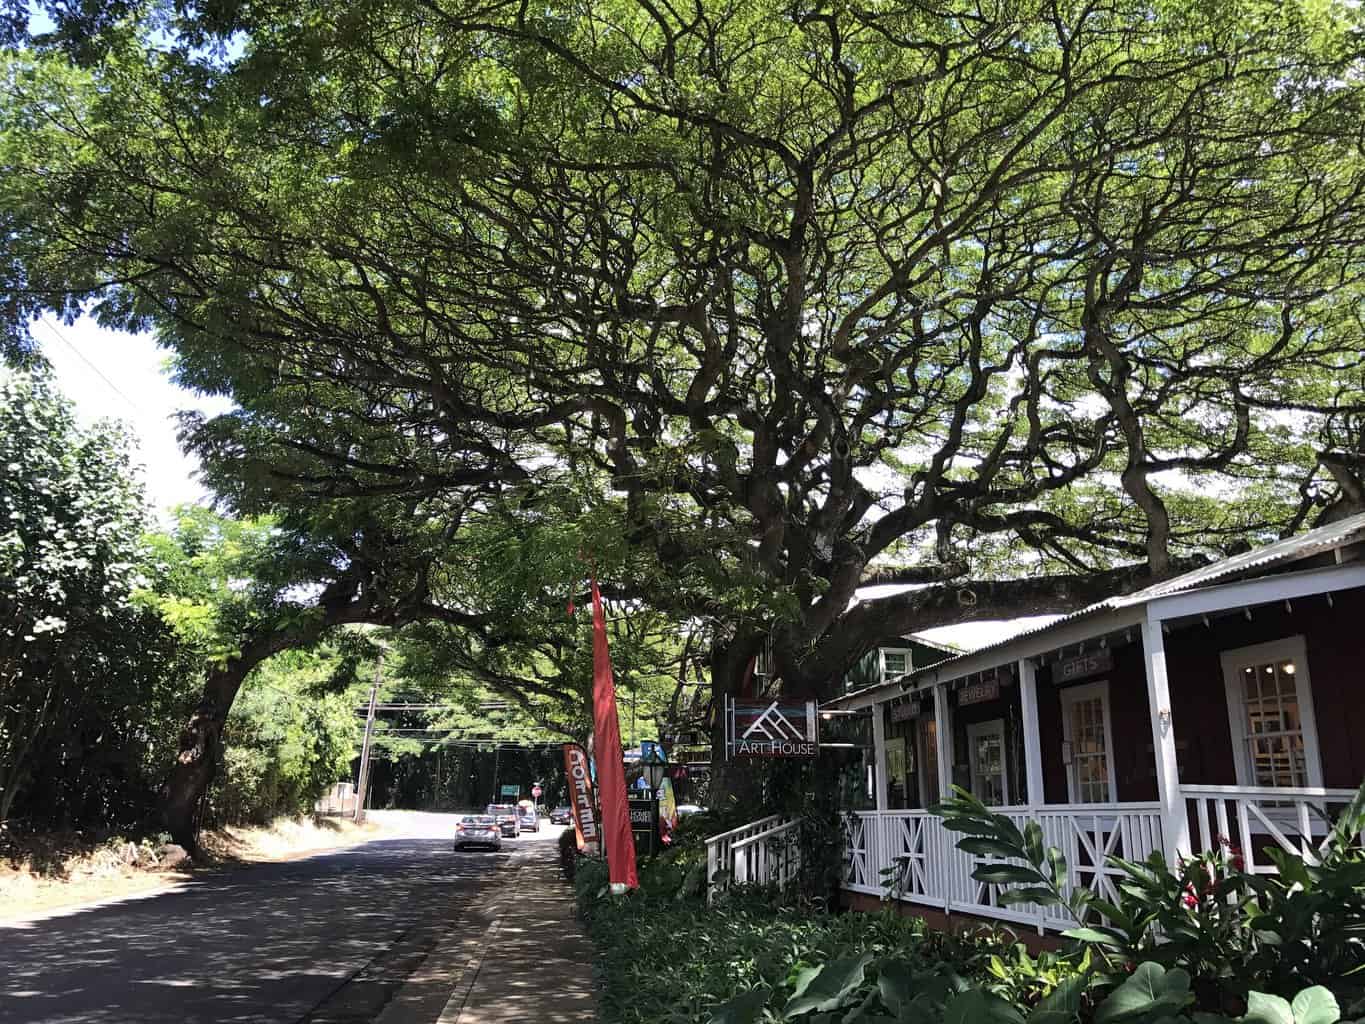 PHOTOS: Magnificent Monkeypod Tree in Old Koloa Town